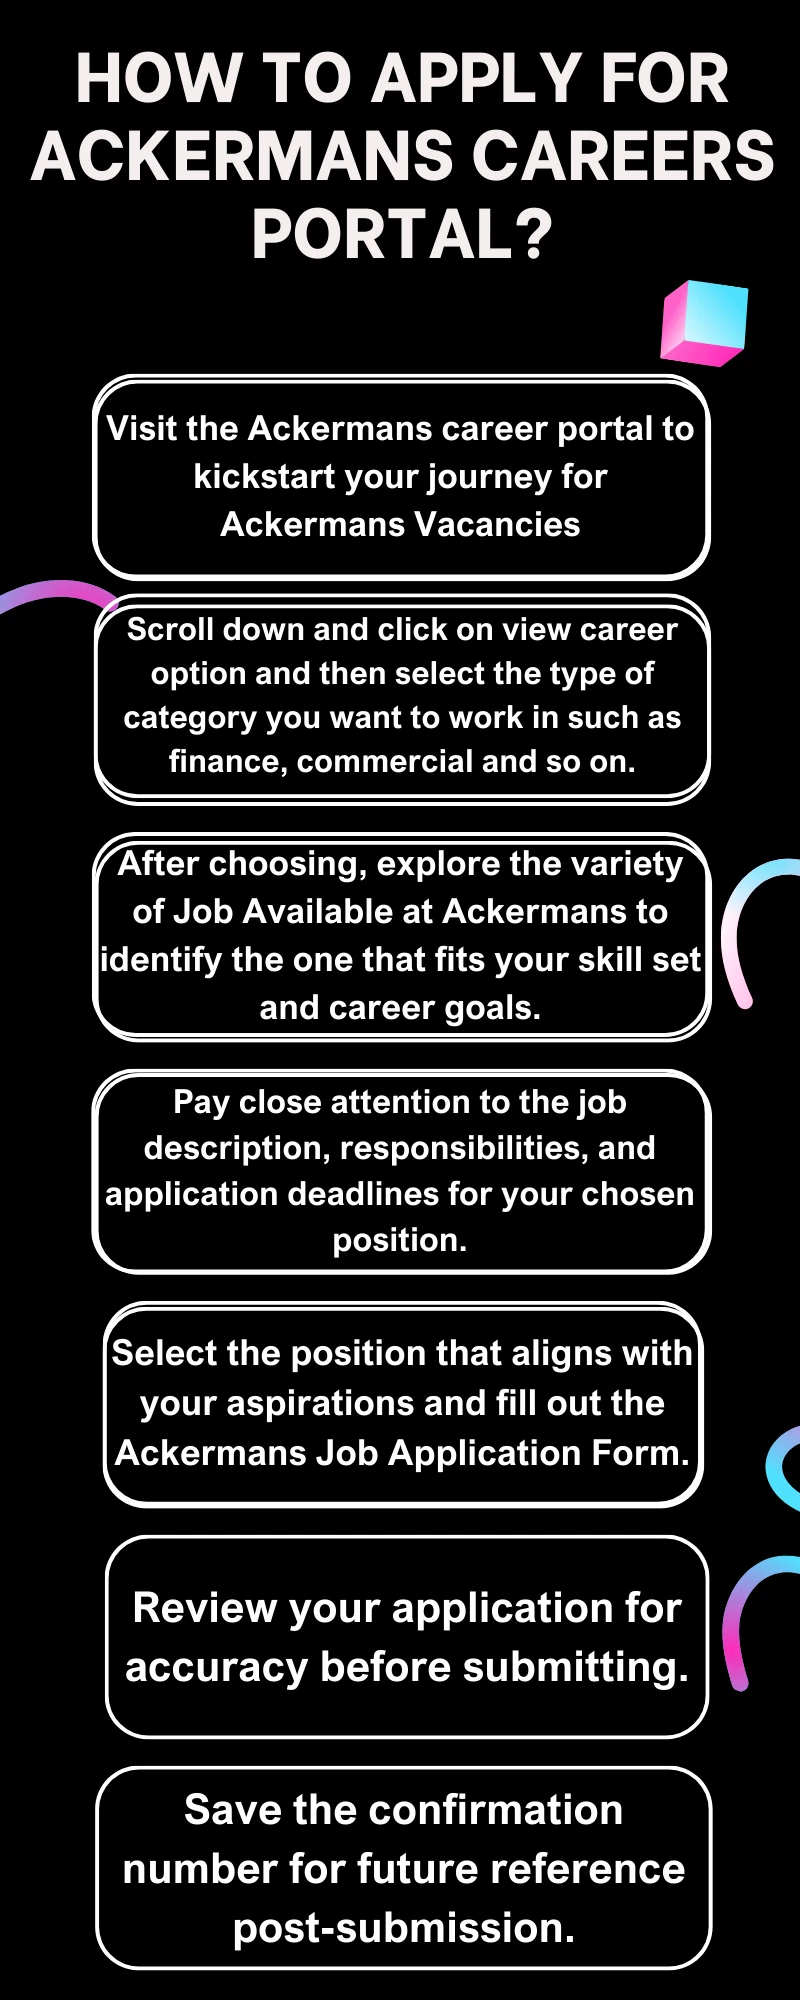 How To Apply for Ackermans Careers Portal?